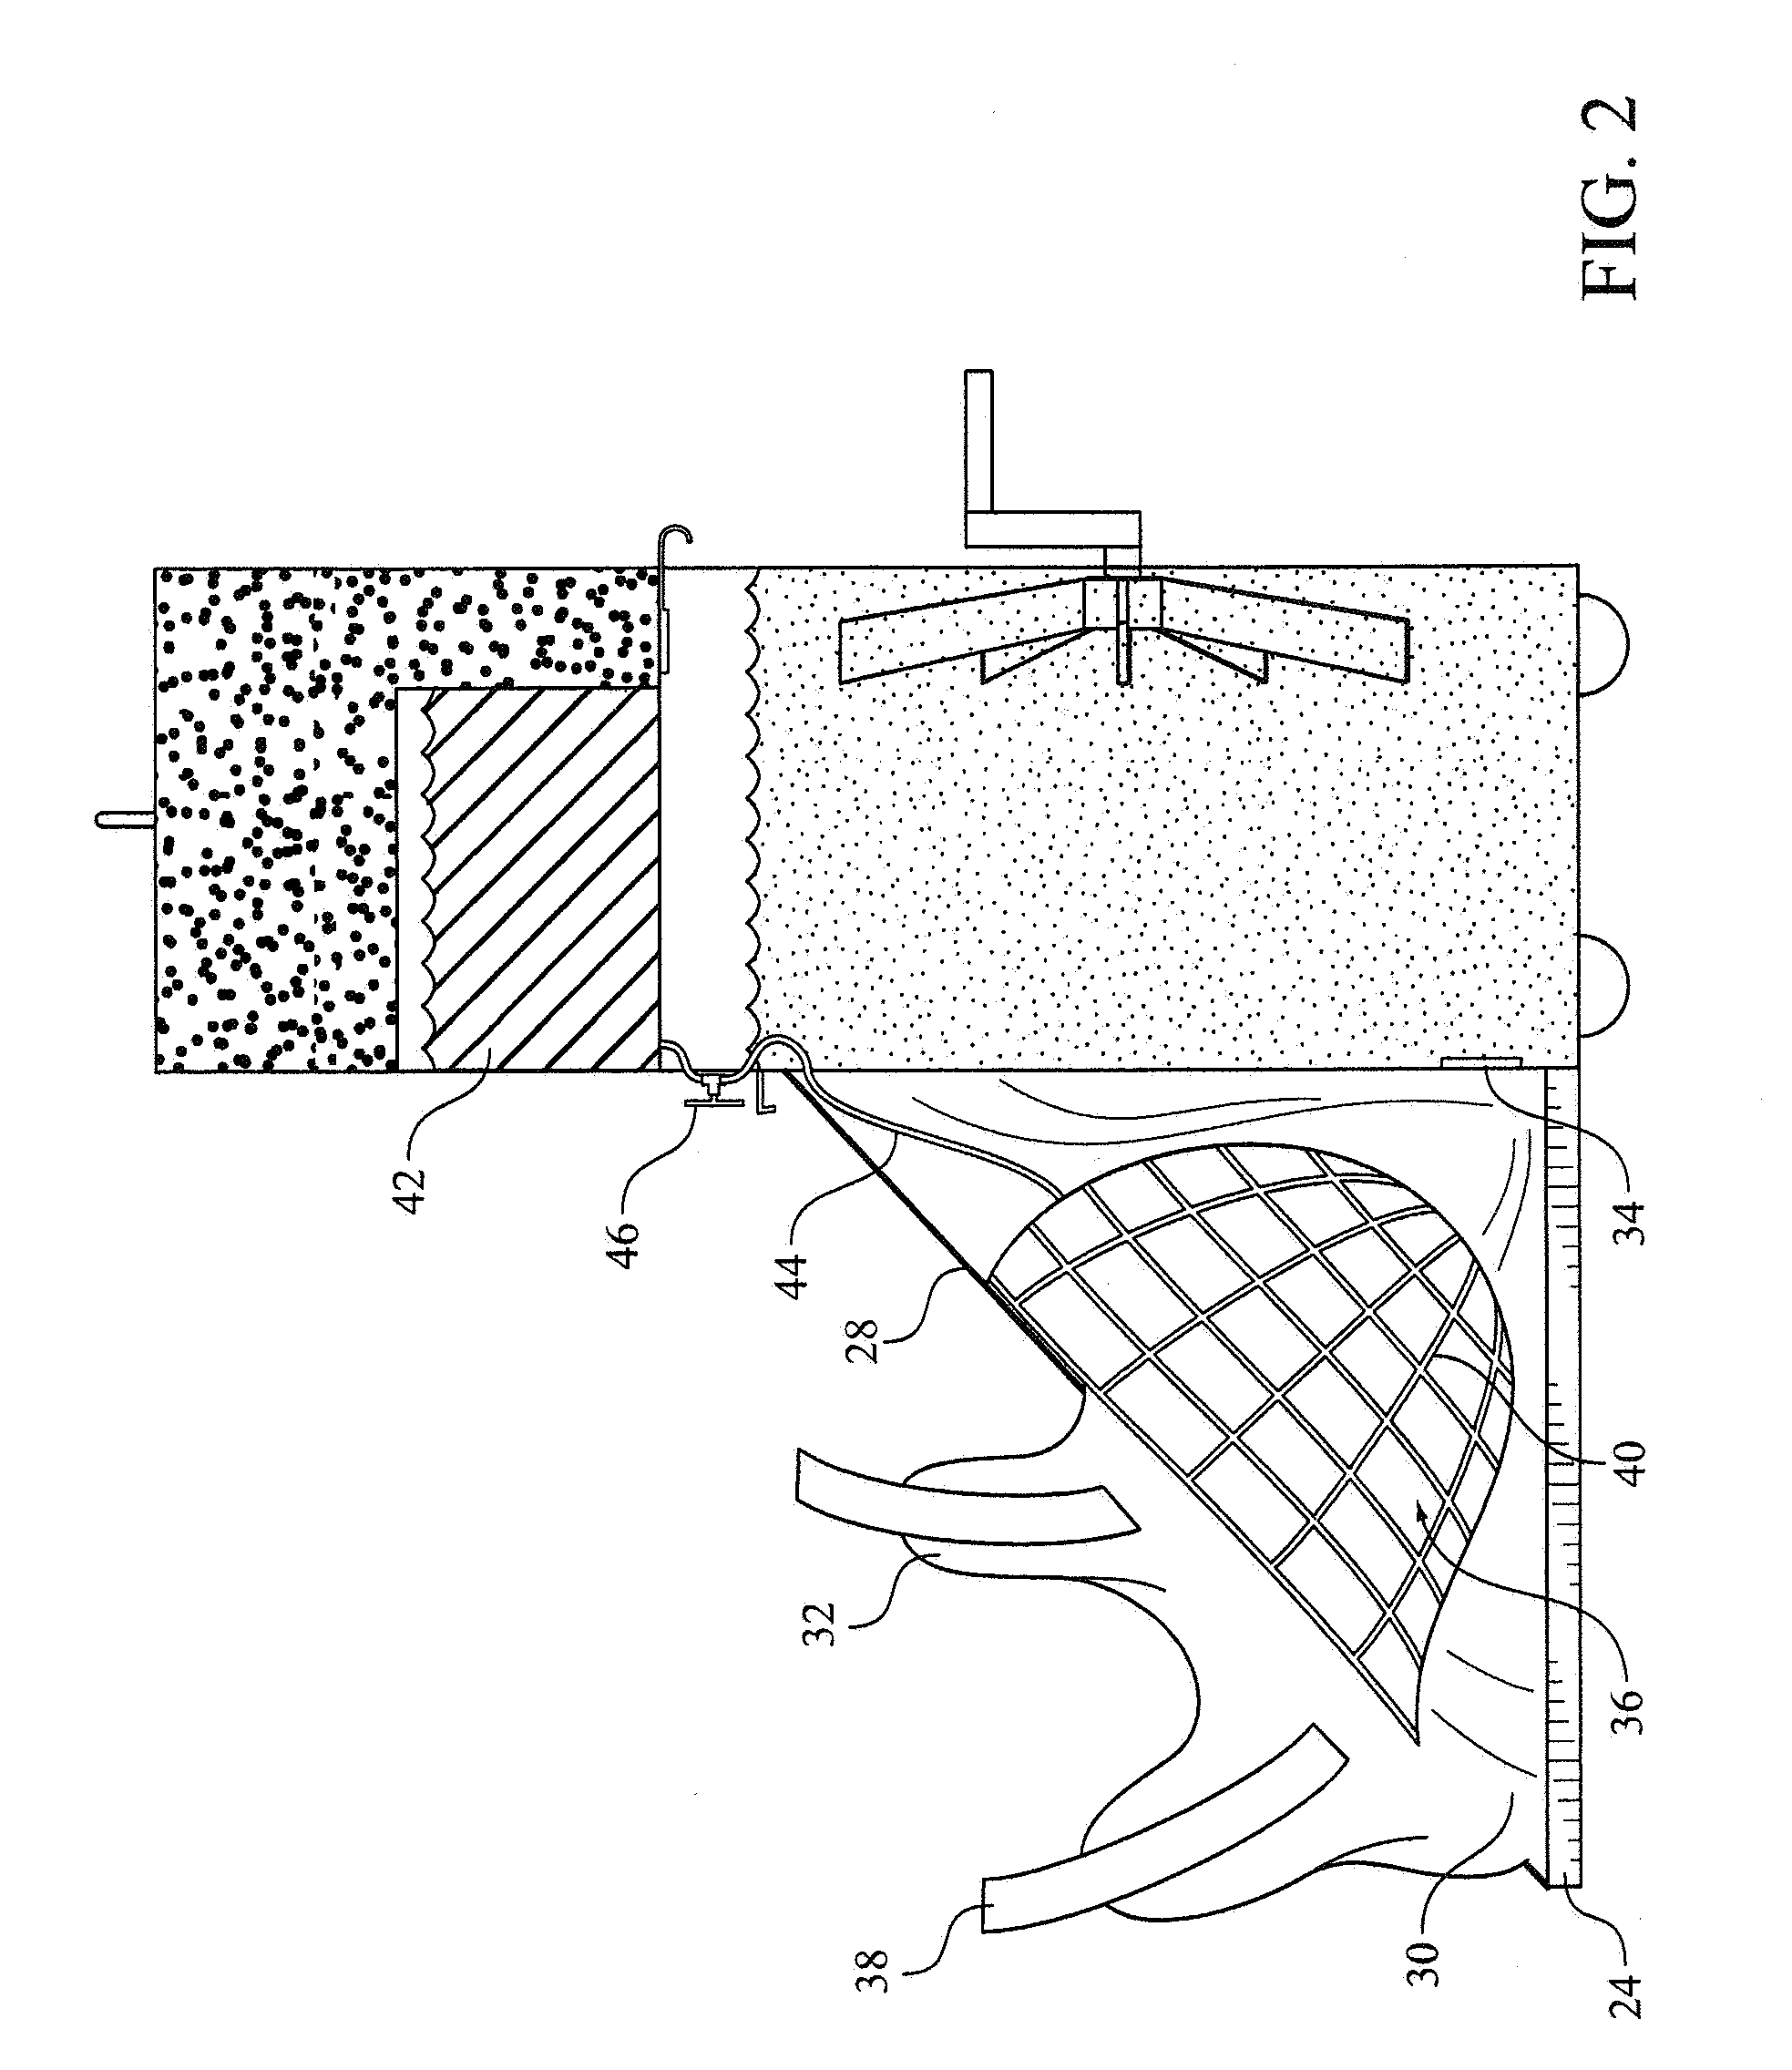 Apparatus and method for preventing brain damage during cardiac arrest, cpr, or severe shock